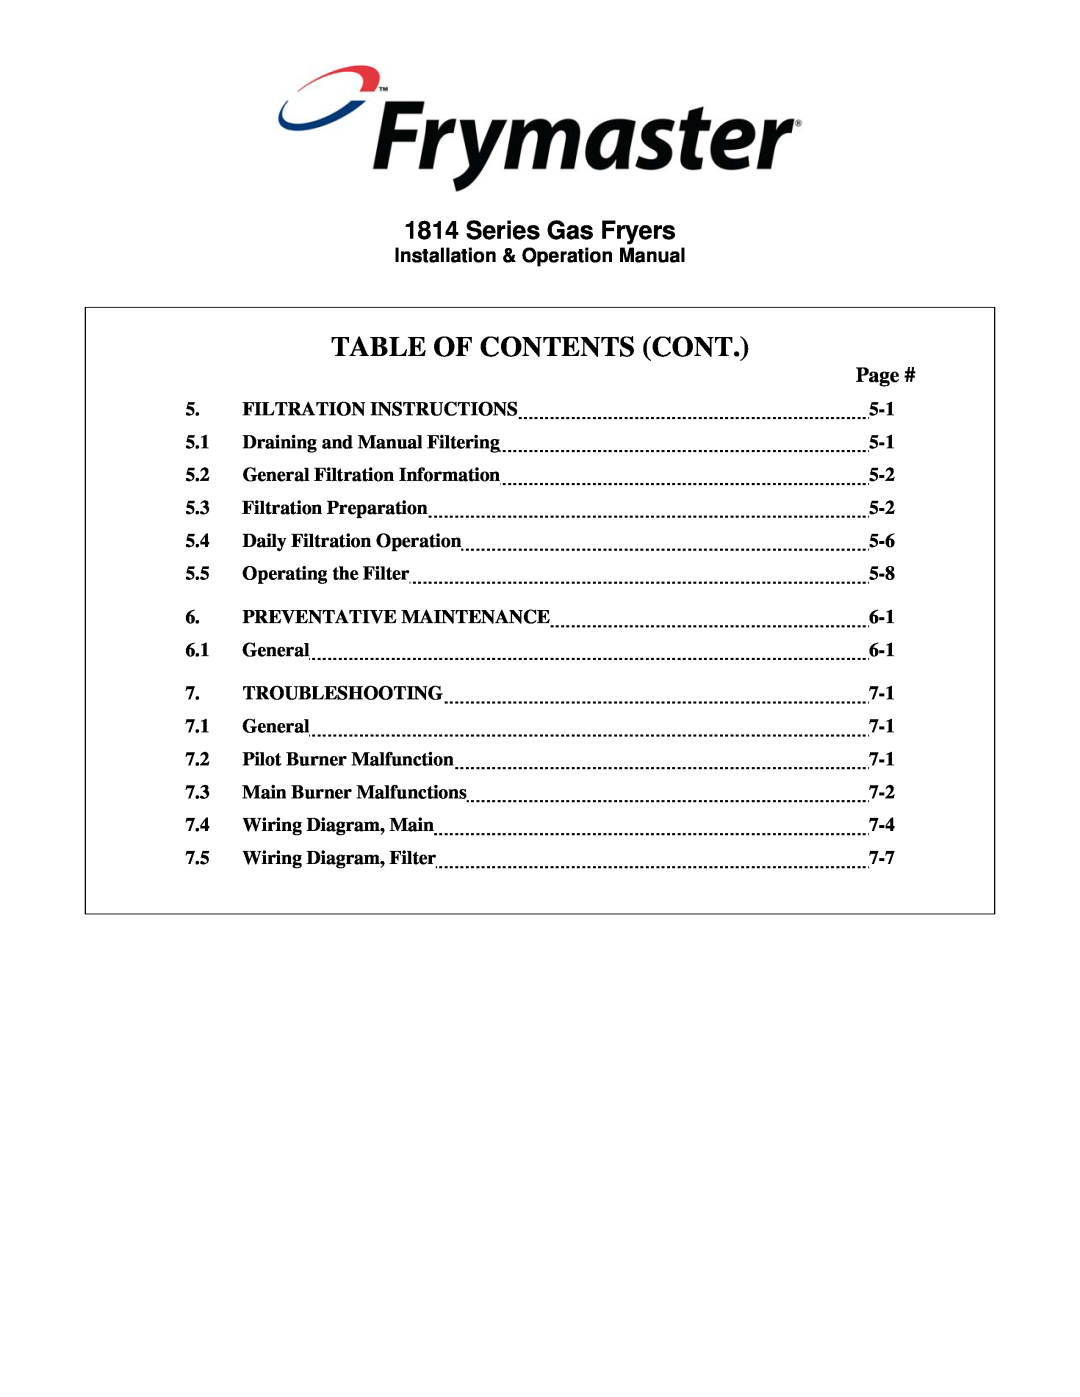 Frymaster BK1814 operation manual Table Of Contents Cont, Series Gas Fryers, Page # 